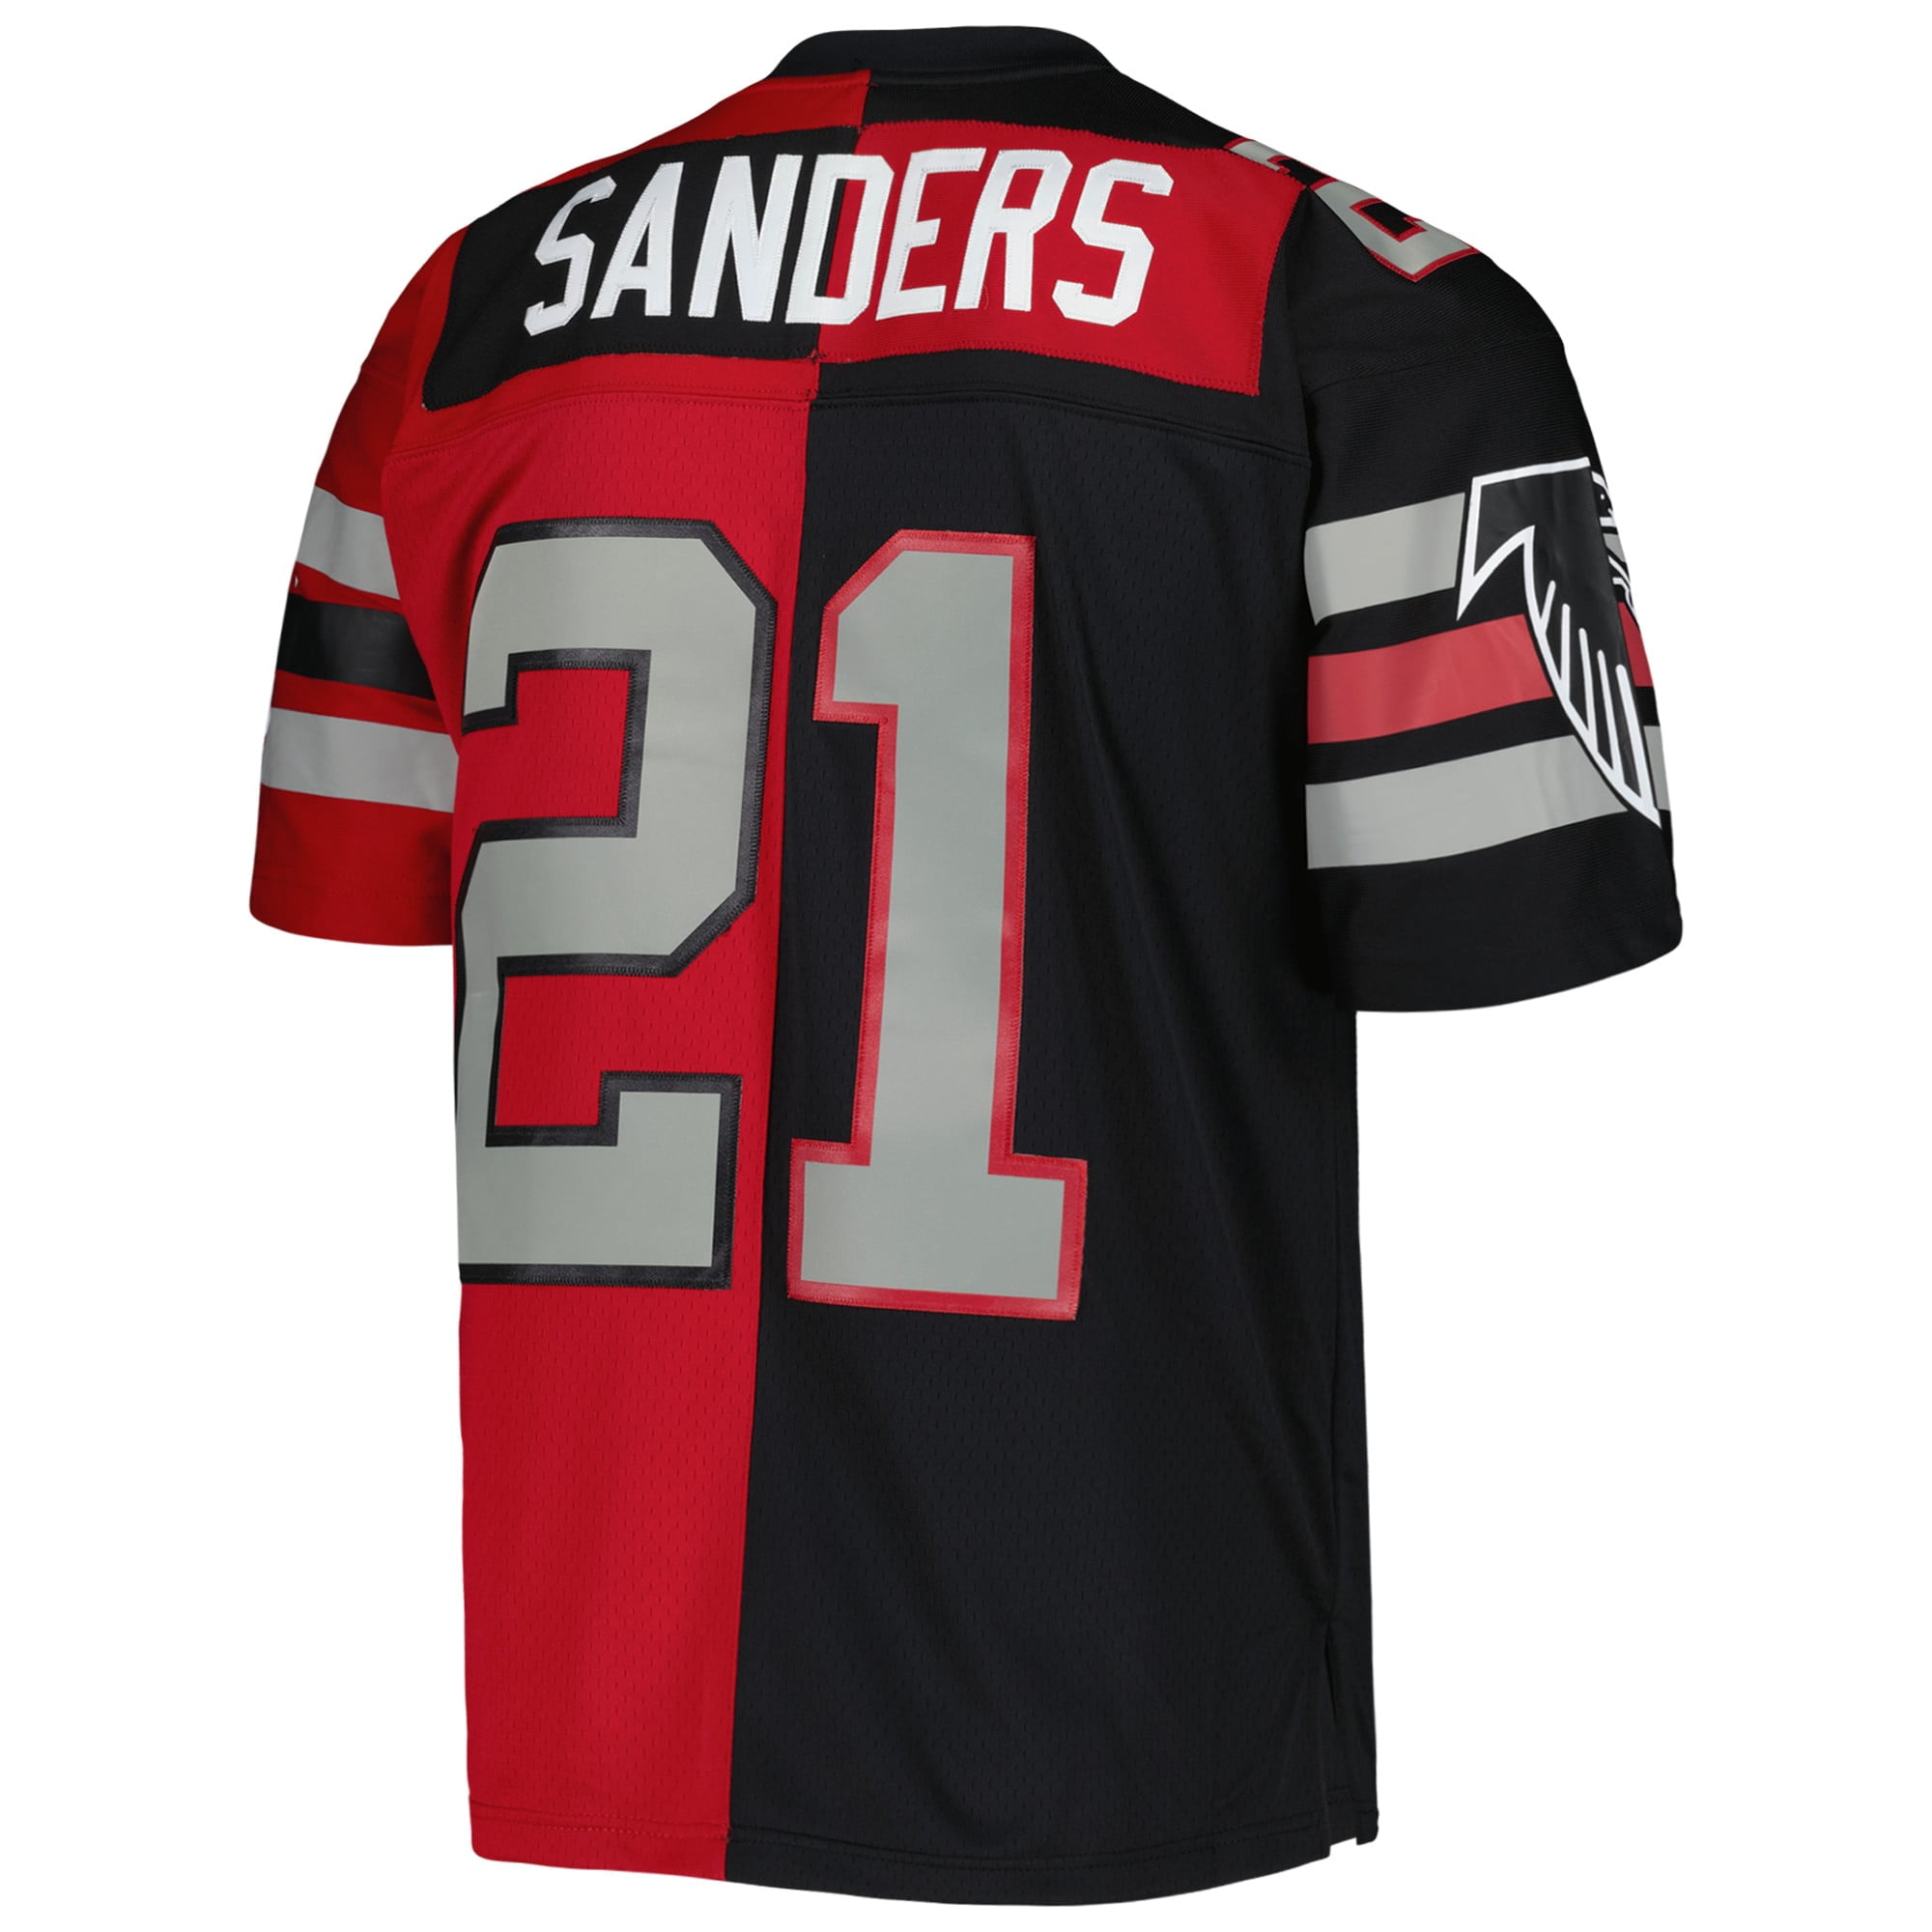 Deion Sanders Atlanta Falcons Autographed Mitchell & Ness Red Replica Jersey